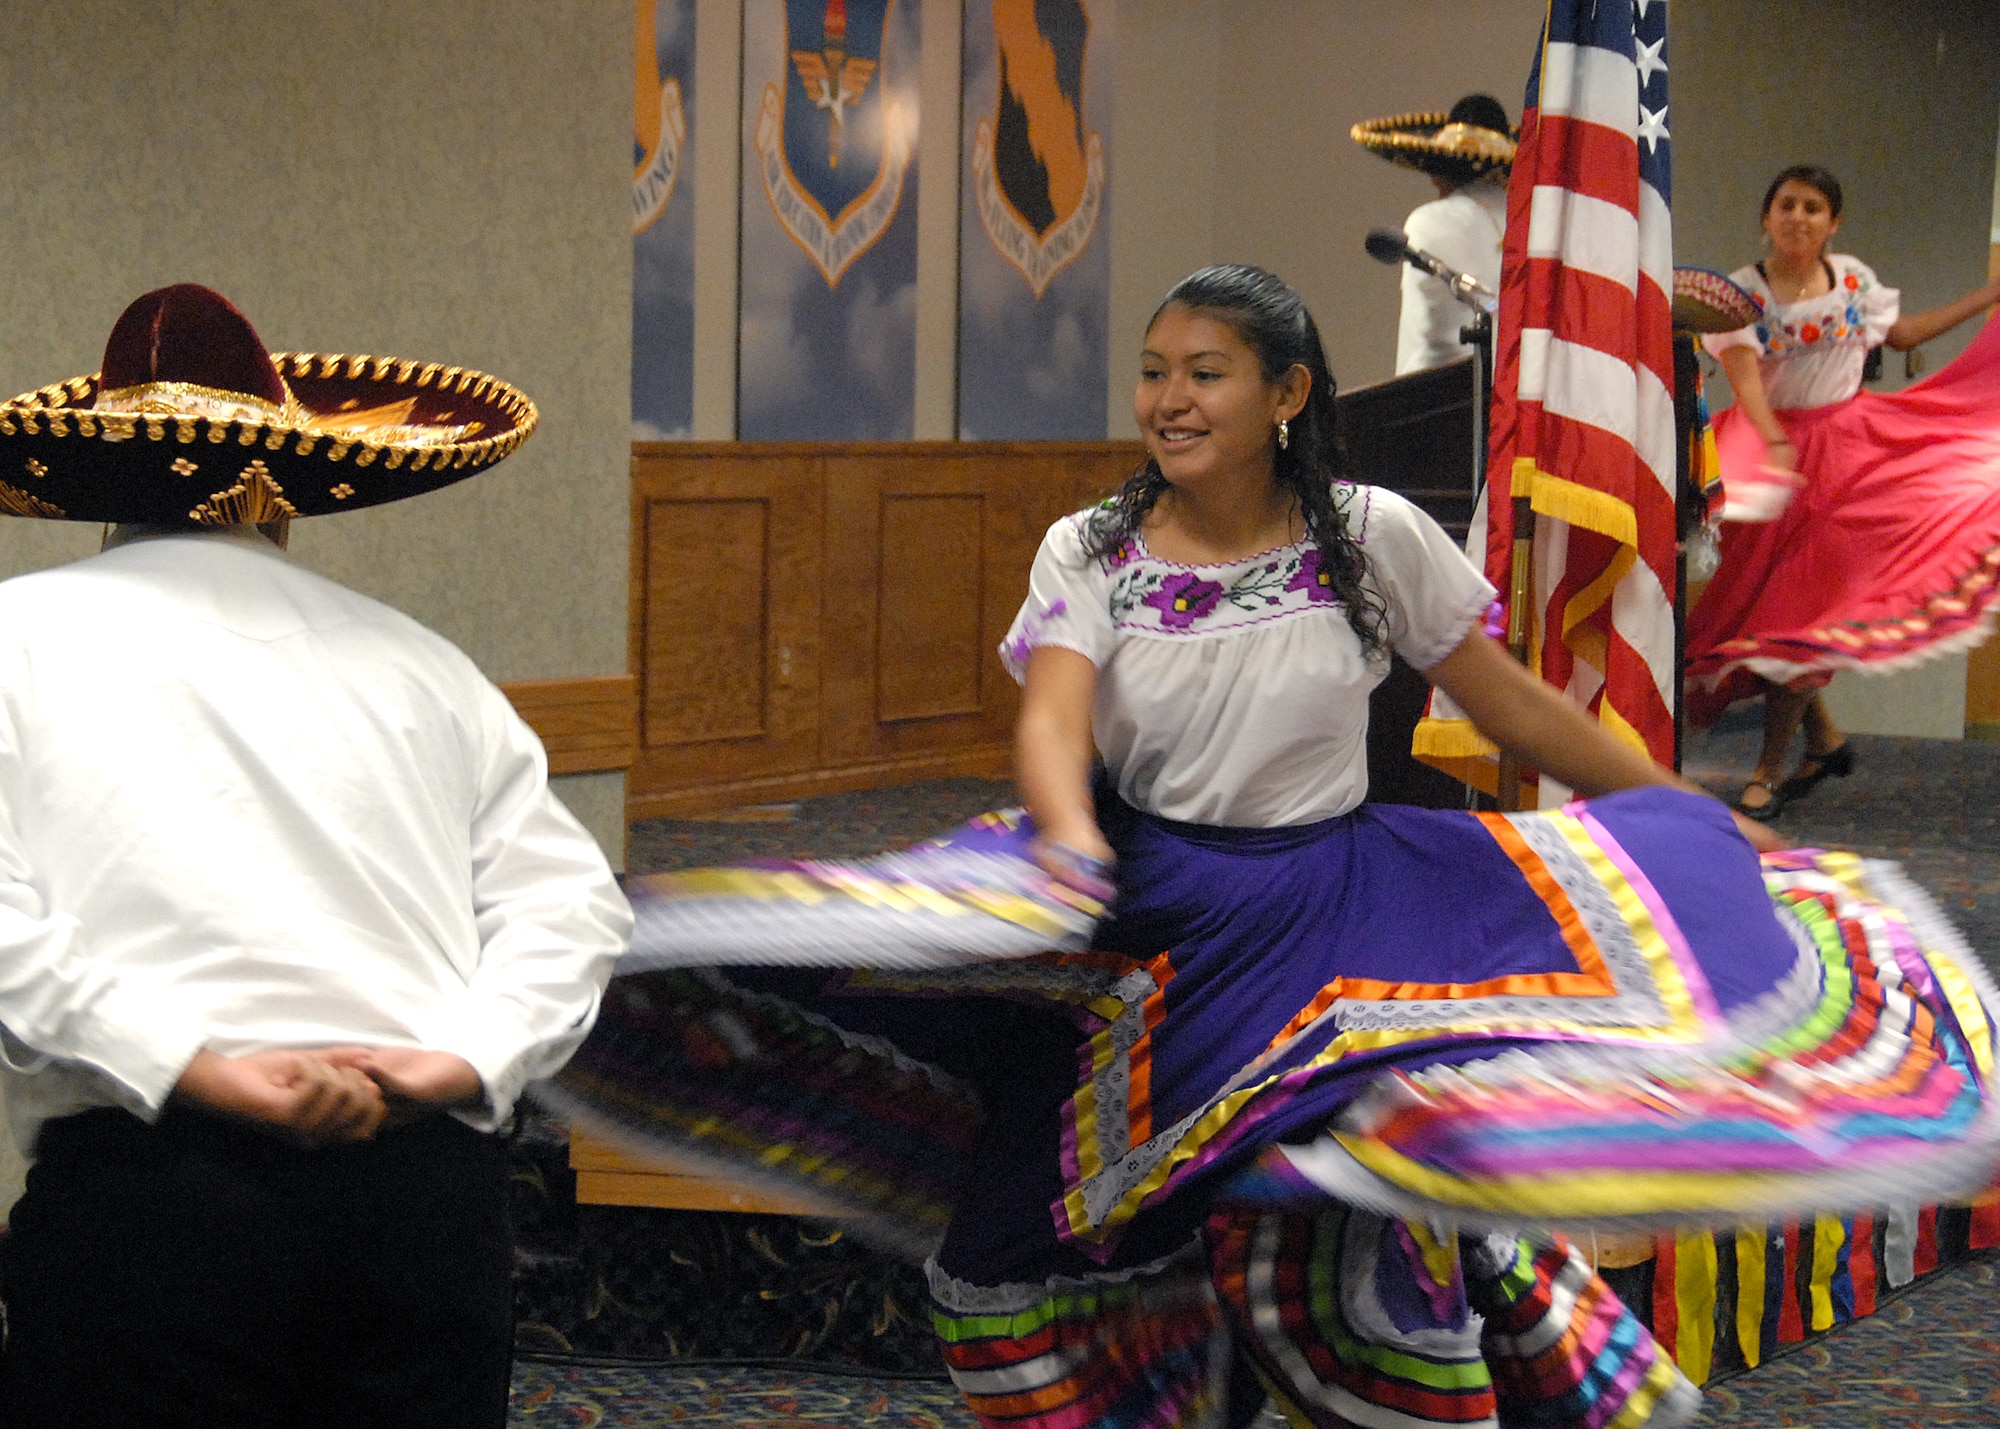 Members of Familia Hernandez and Grupo Mexitzos, a Mexican-Heritage dance group, perform at the Sheppard Hispanic Heritage Month Luncheon at the Sheppard Club Oct. 22. (U.S. Air Force photo/Mike Litteken)